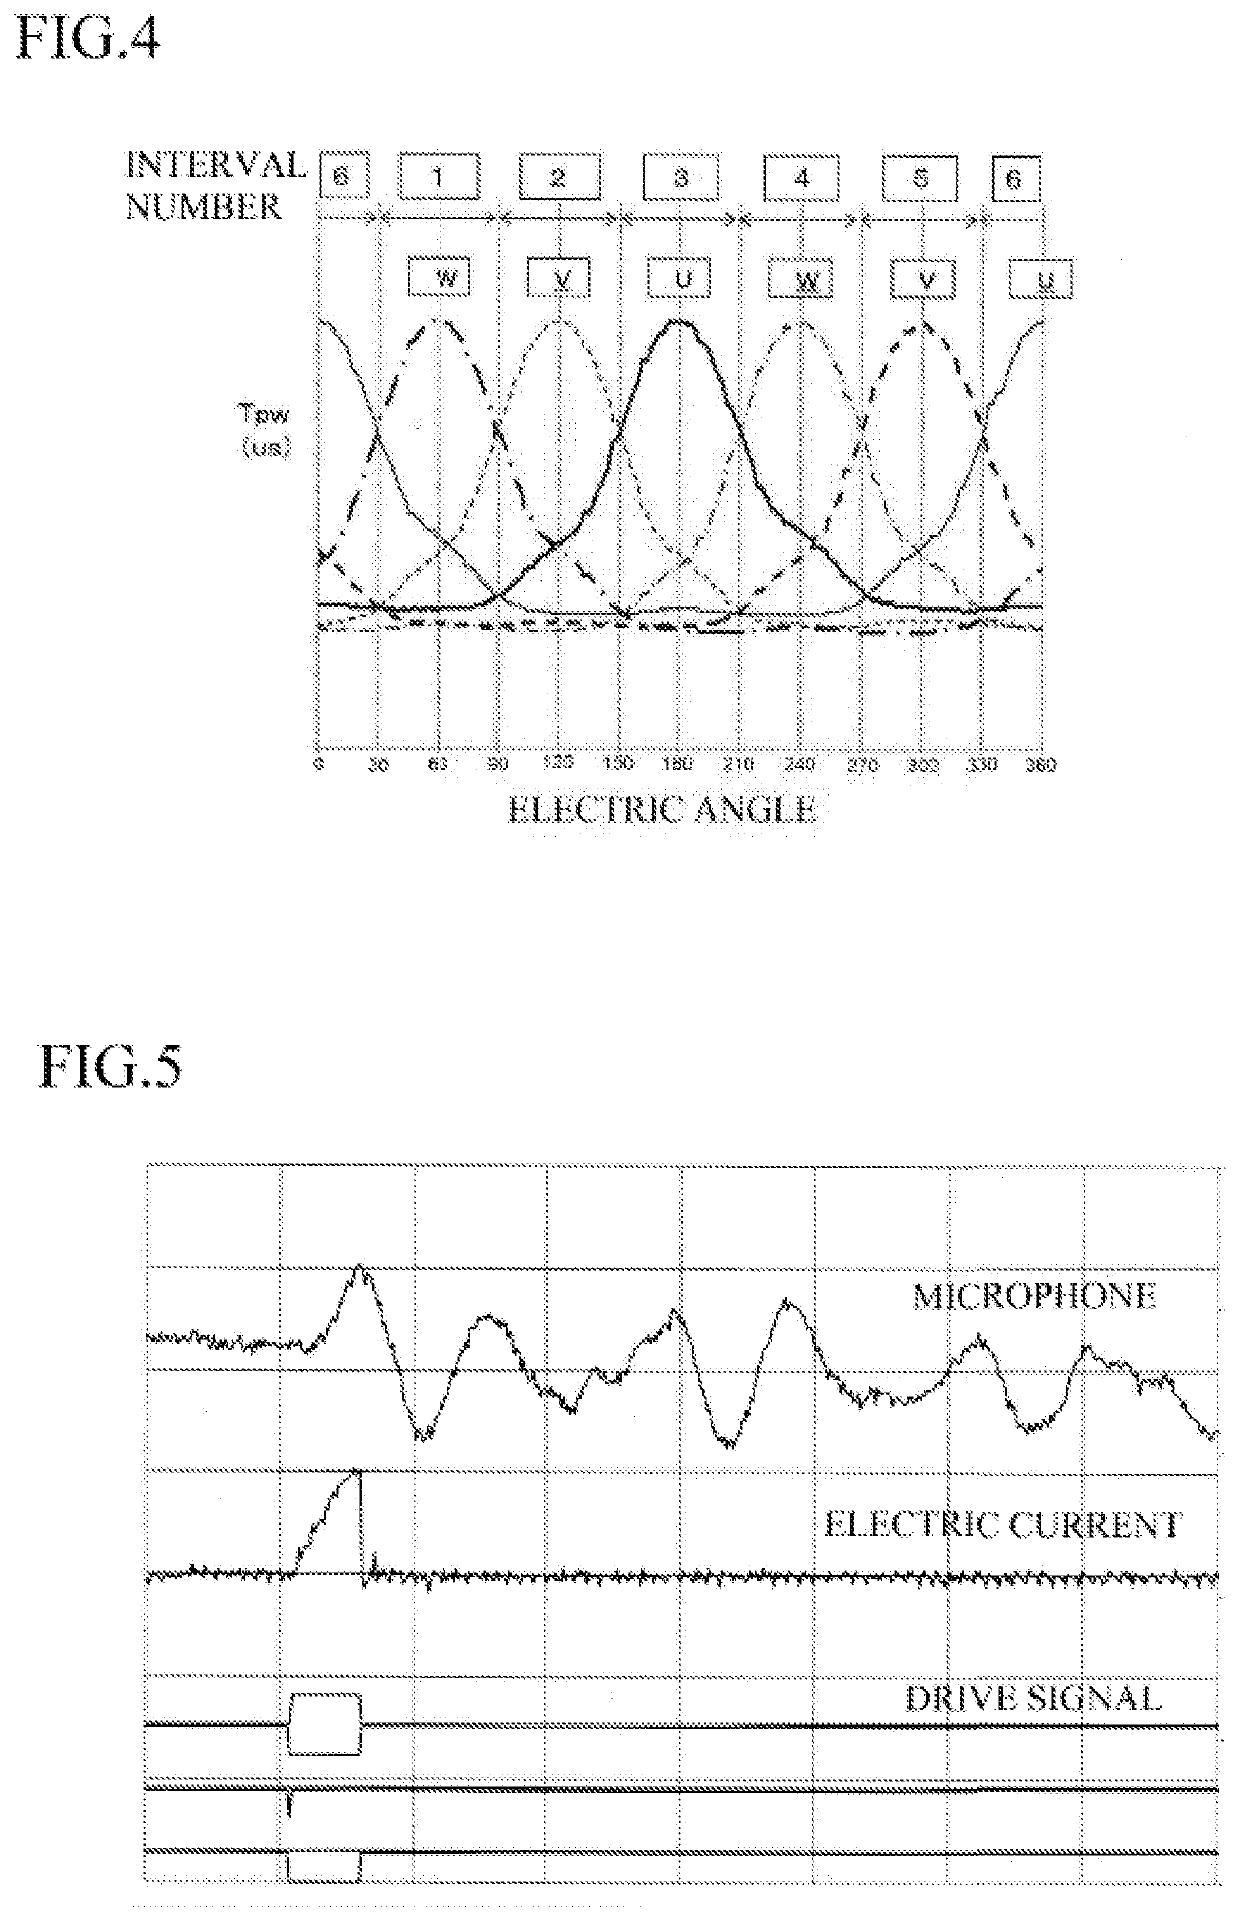 Method for detecting magnetic field location in electric motor